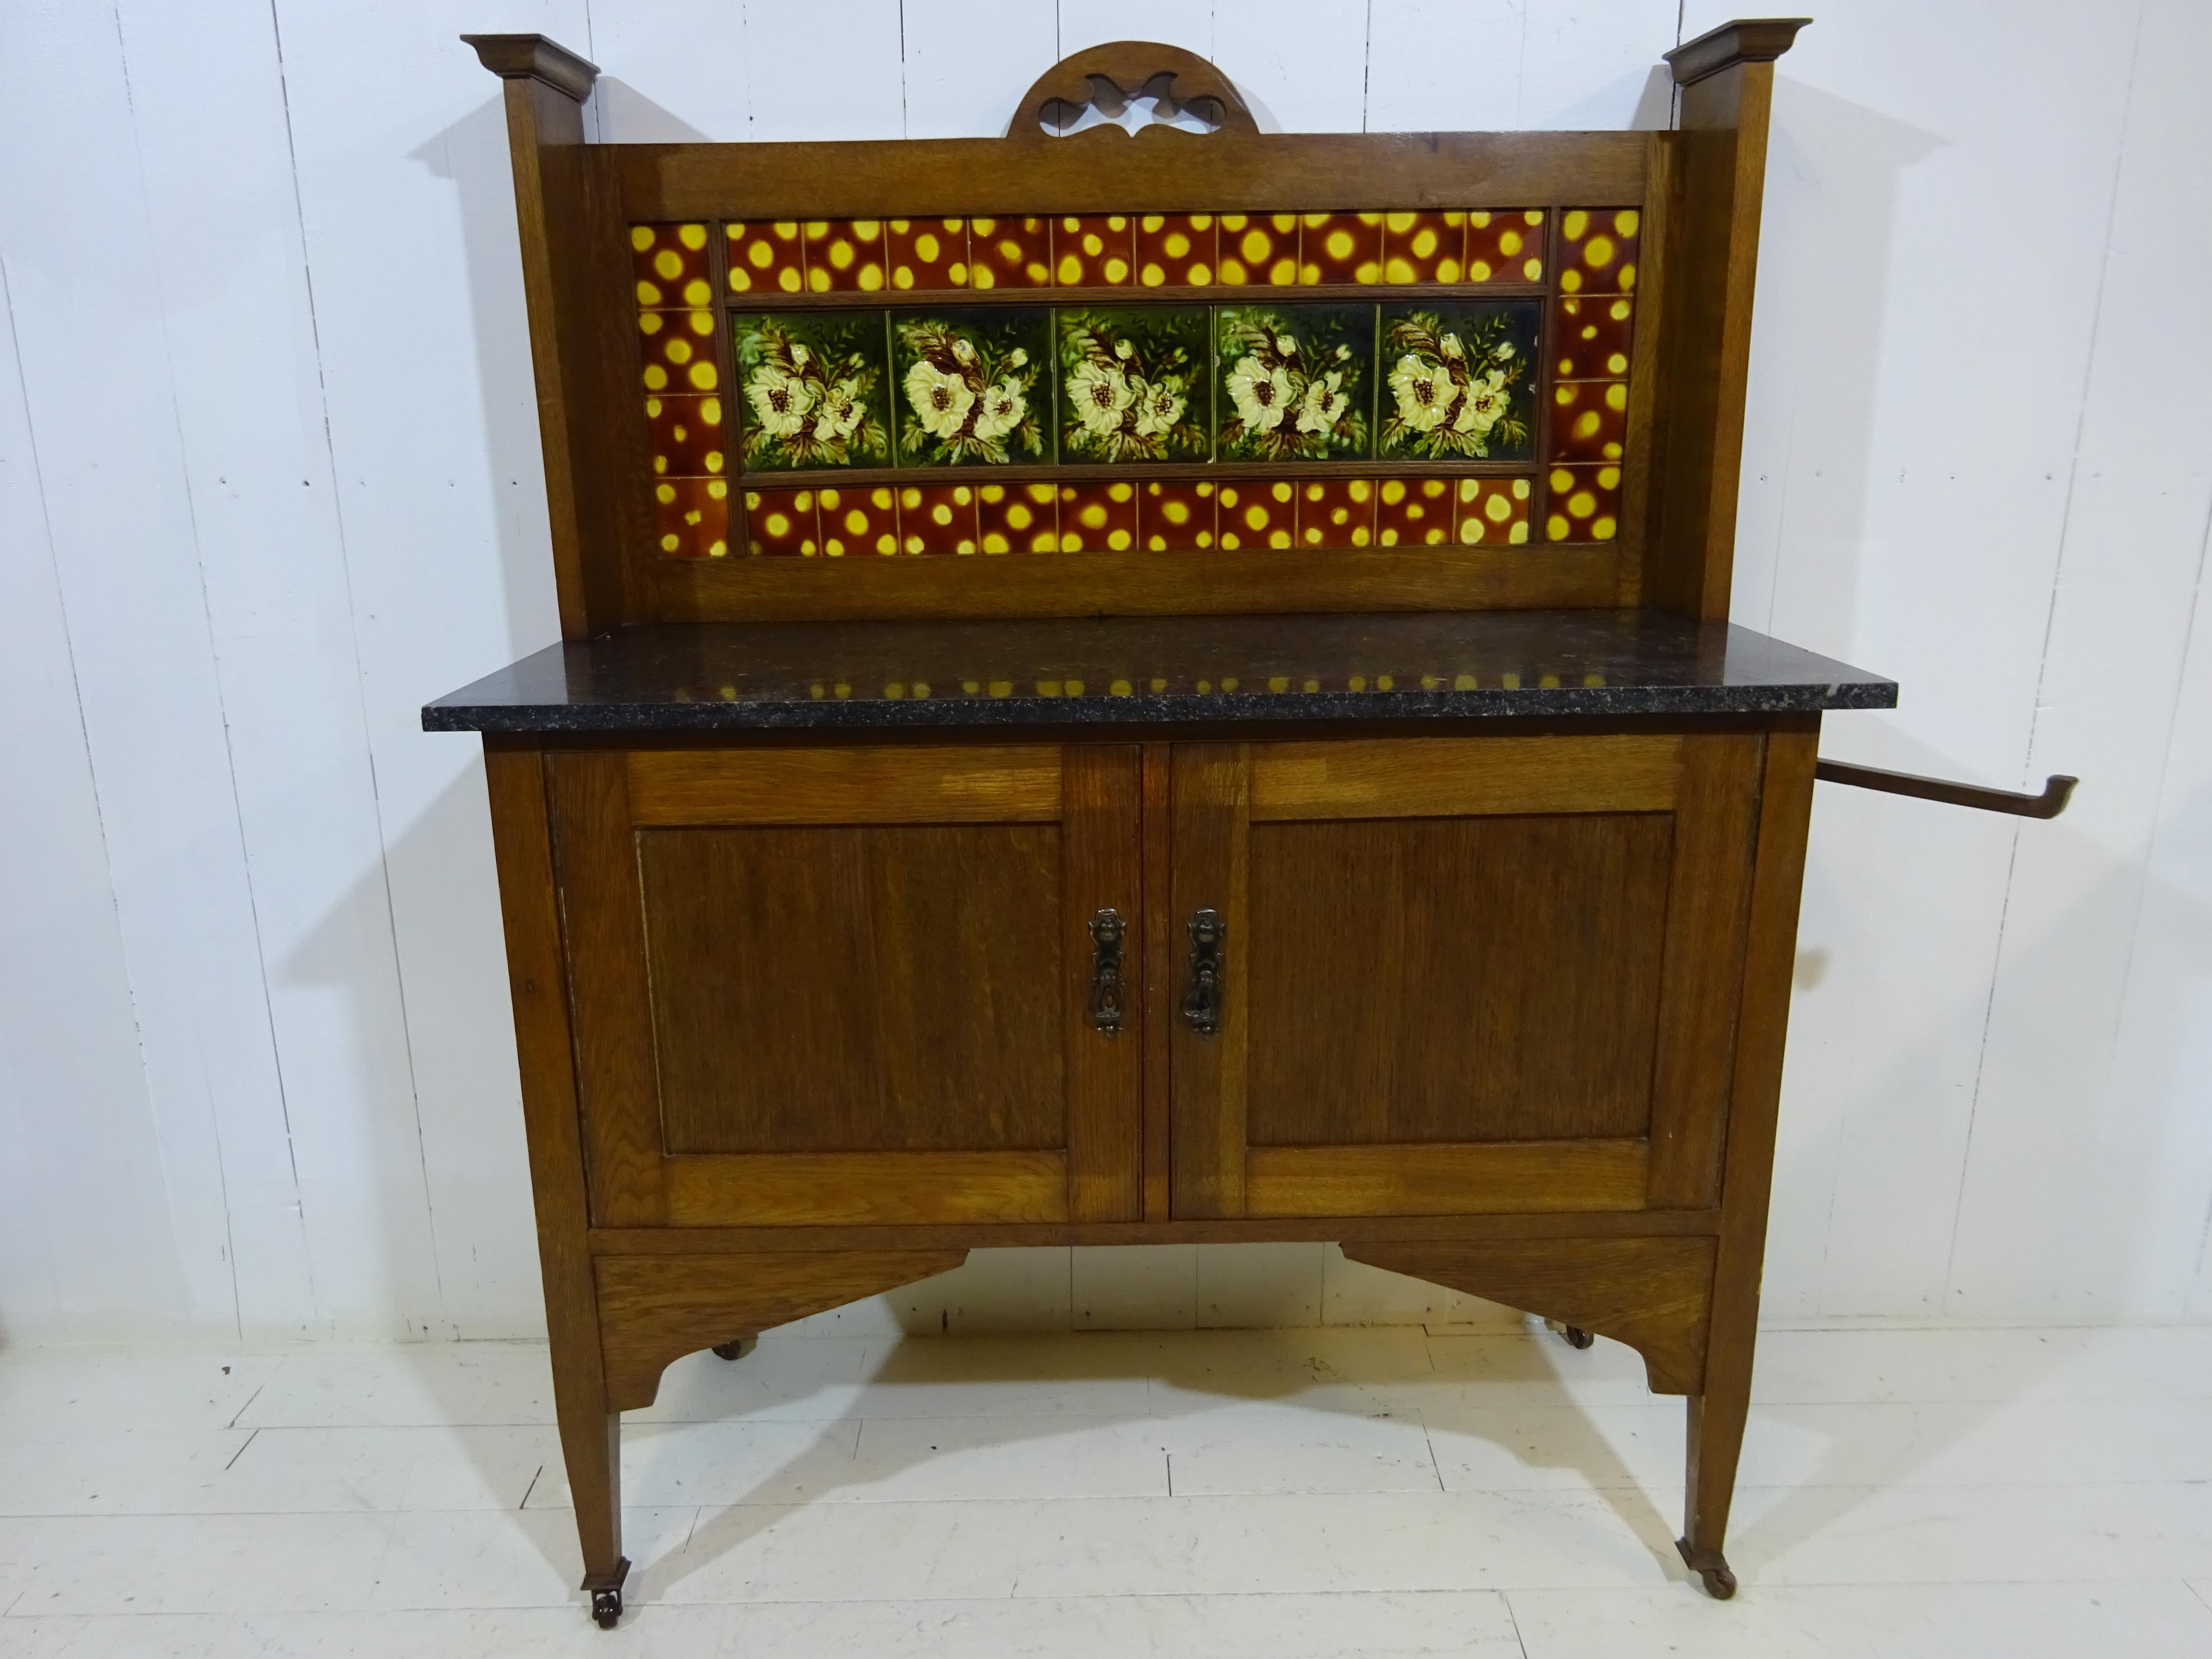 Victorian Marble Top Wash Stand in Oak with Floral Glazed Tiles 9